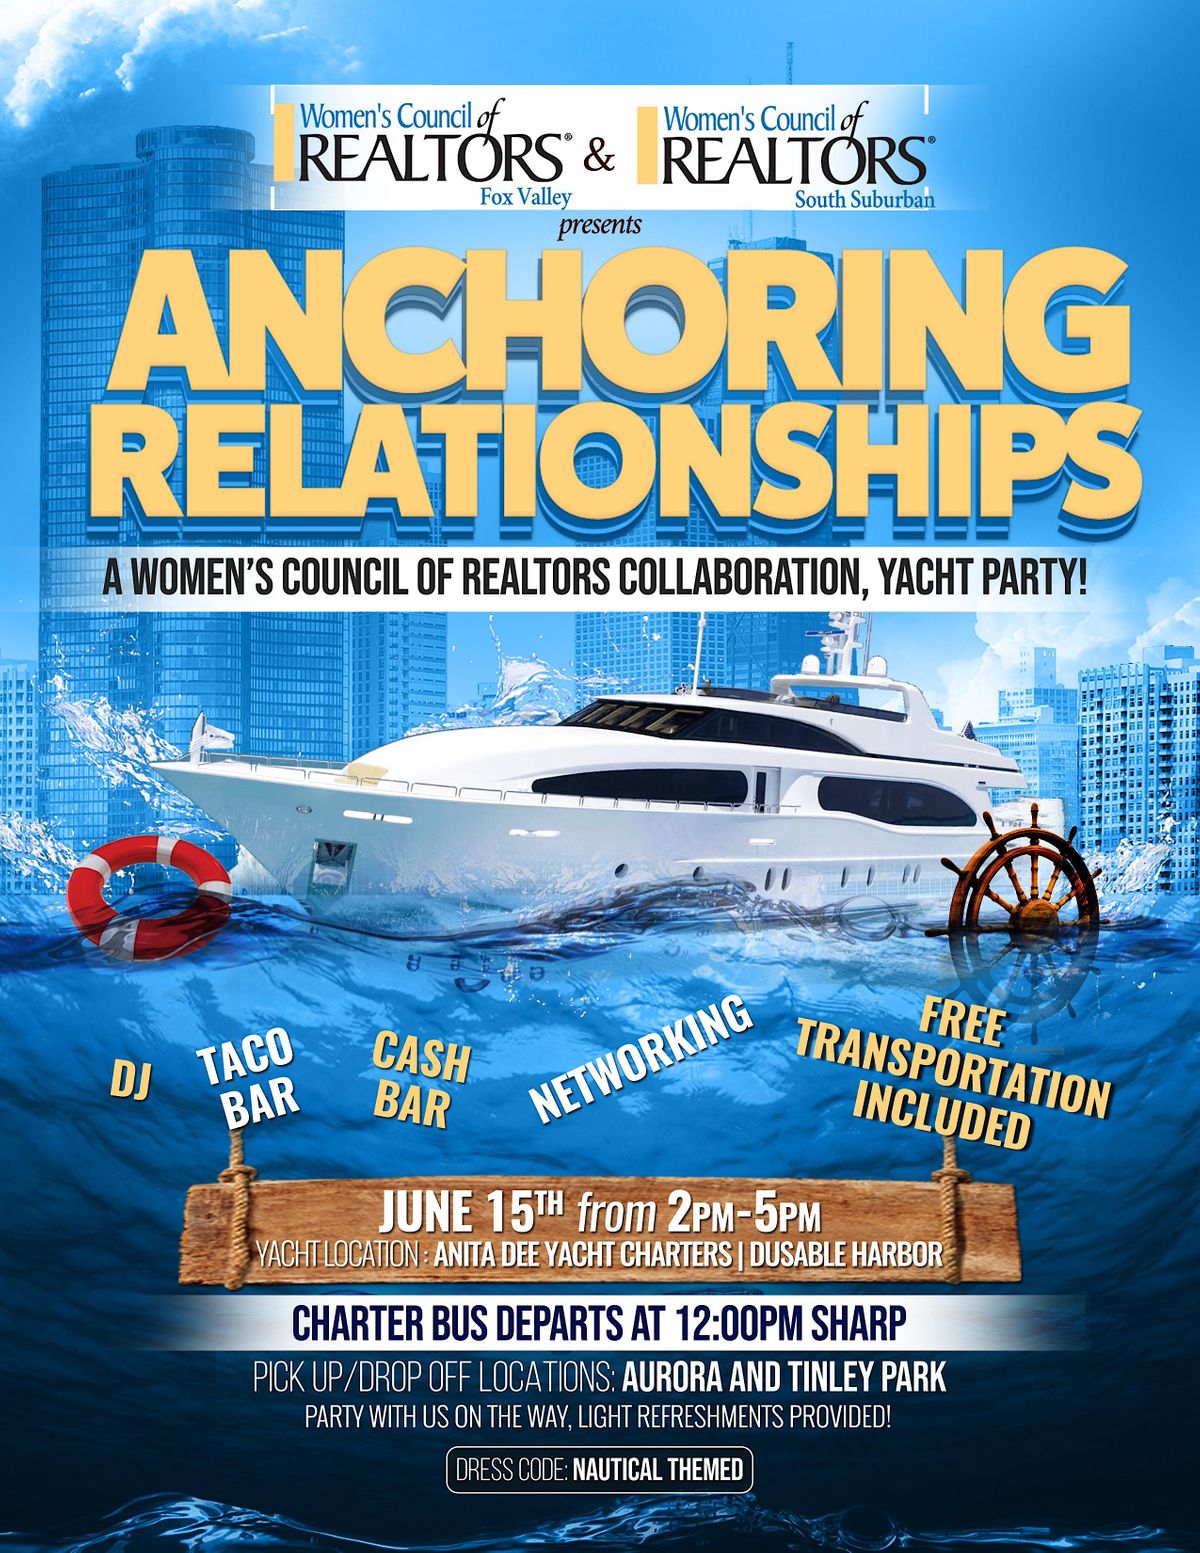 Anchoring Relationships - A Women's Council of REALTORS Collaboration